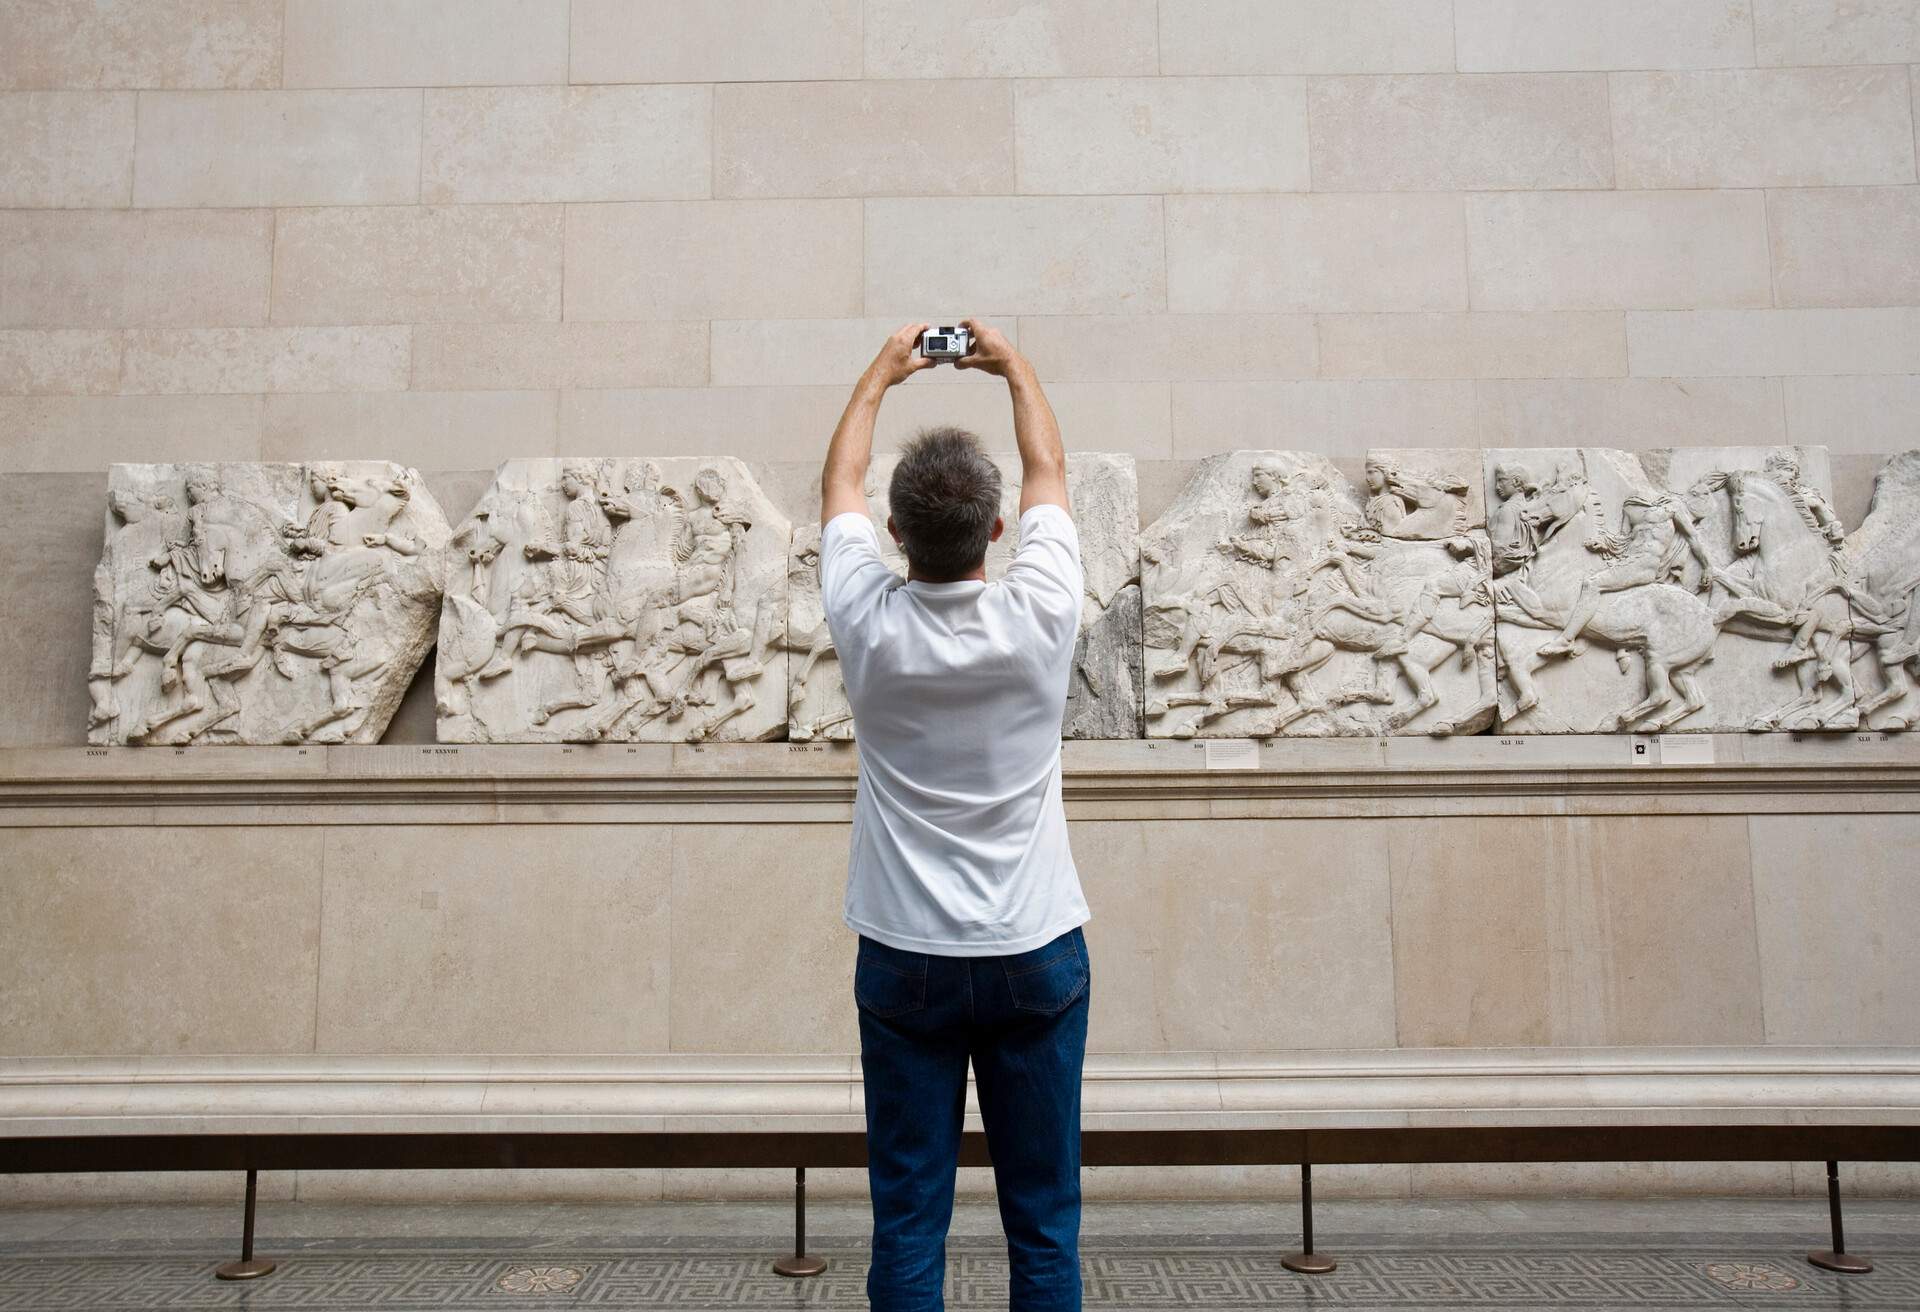 DEST_UK_ENGLAND_LONDON_BRITISH_MUSEUM_MAN_TAKING_PHOTO_OF_CARVING_GettyImages-200522795-001